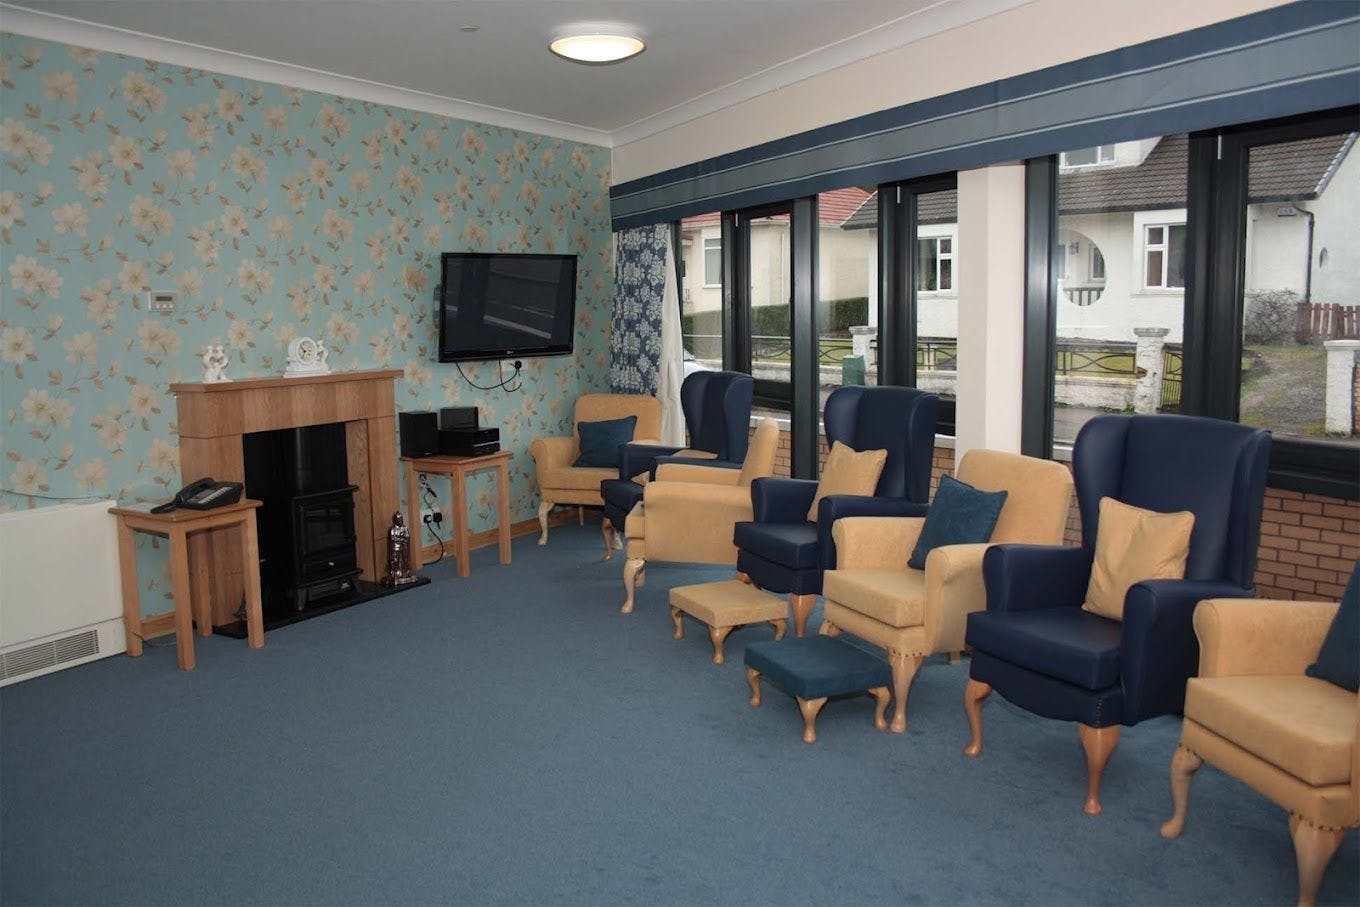 Independent Care Home - Westerton care home 5